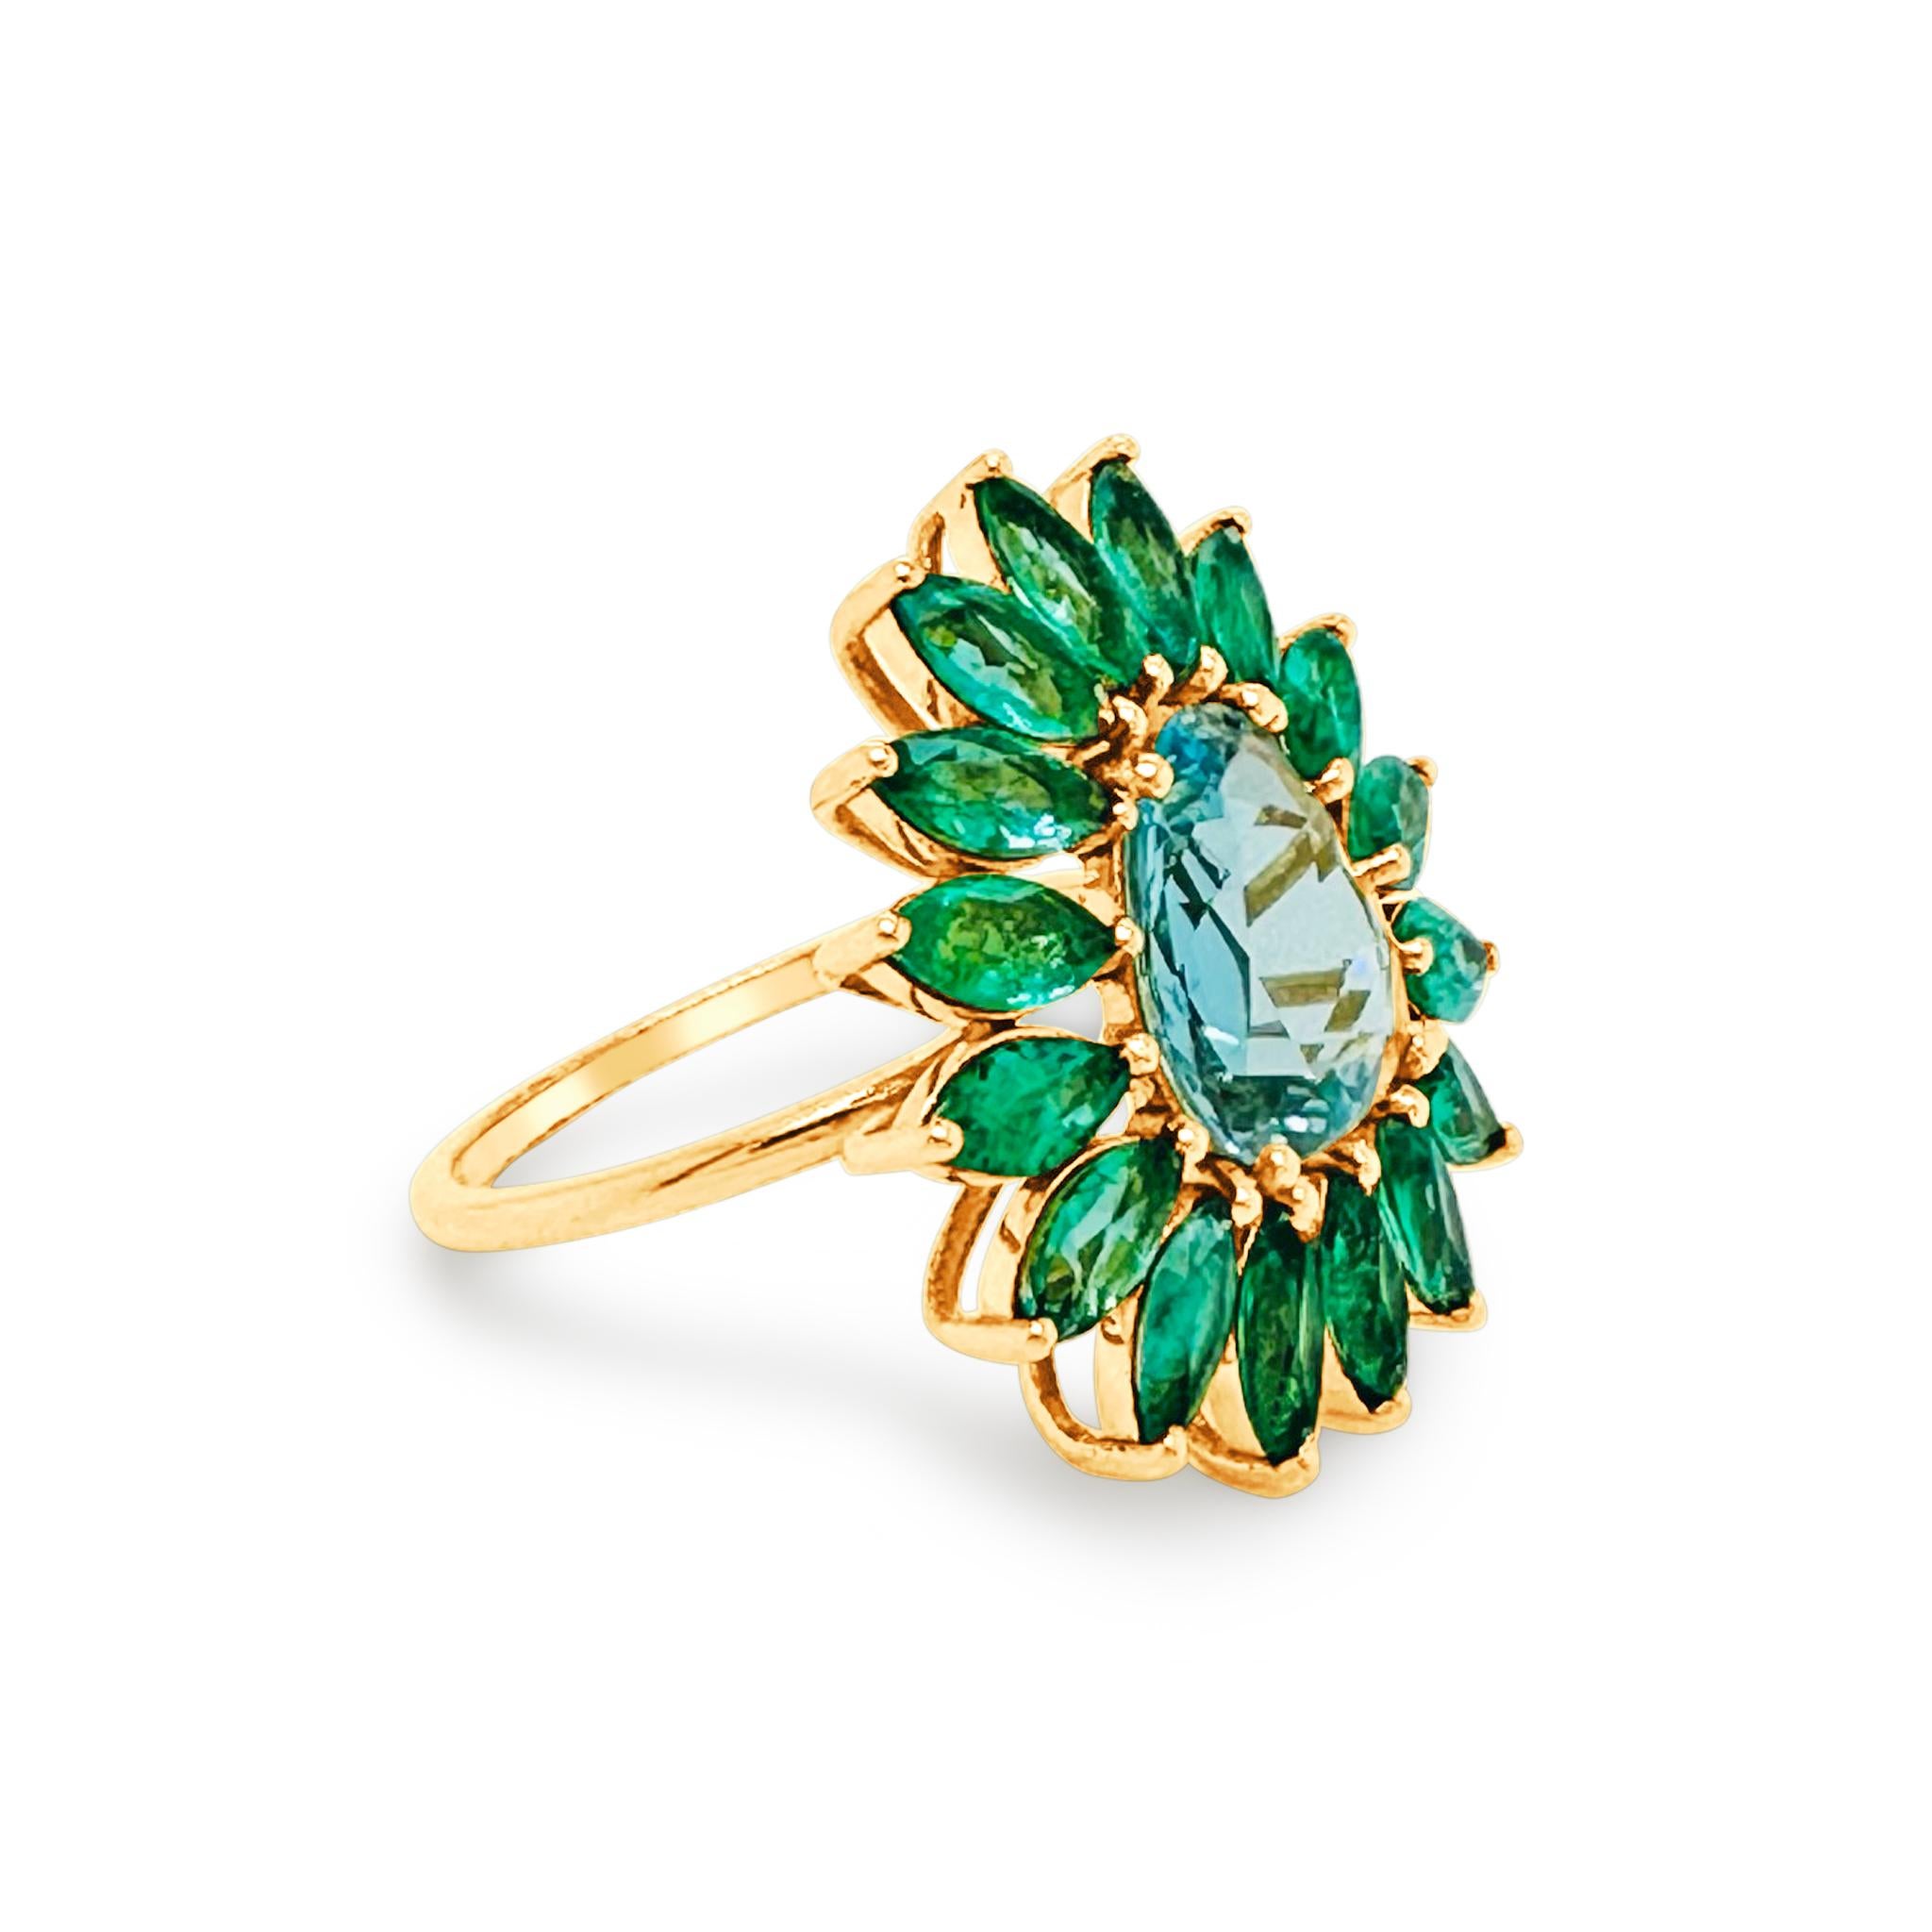 Tresor Gemstone Ring features 4.88 carats Gemstone in 18k yellow gold. The Ring are an ode to the luxurious yet classic beauty with sparkly diamonds. Their contemporary and modern design makes them versatile in their use. The Ring are perfect to be